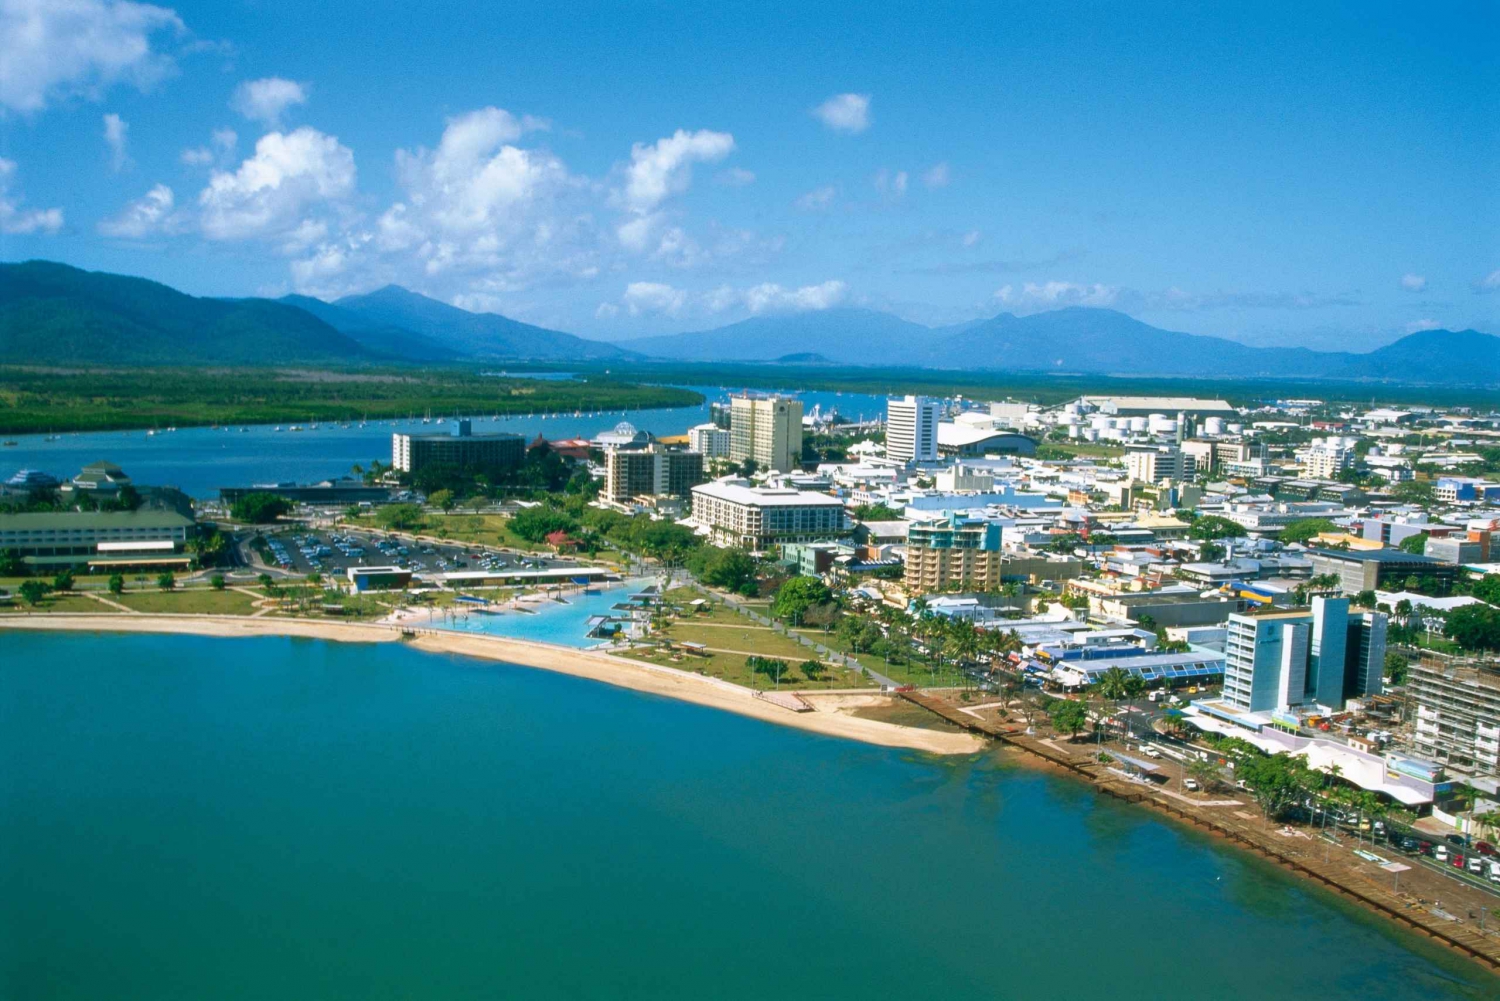 Discover Cairns: Cairns River Cruise & City Sights Tour